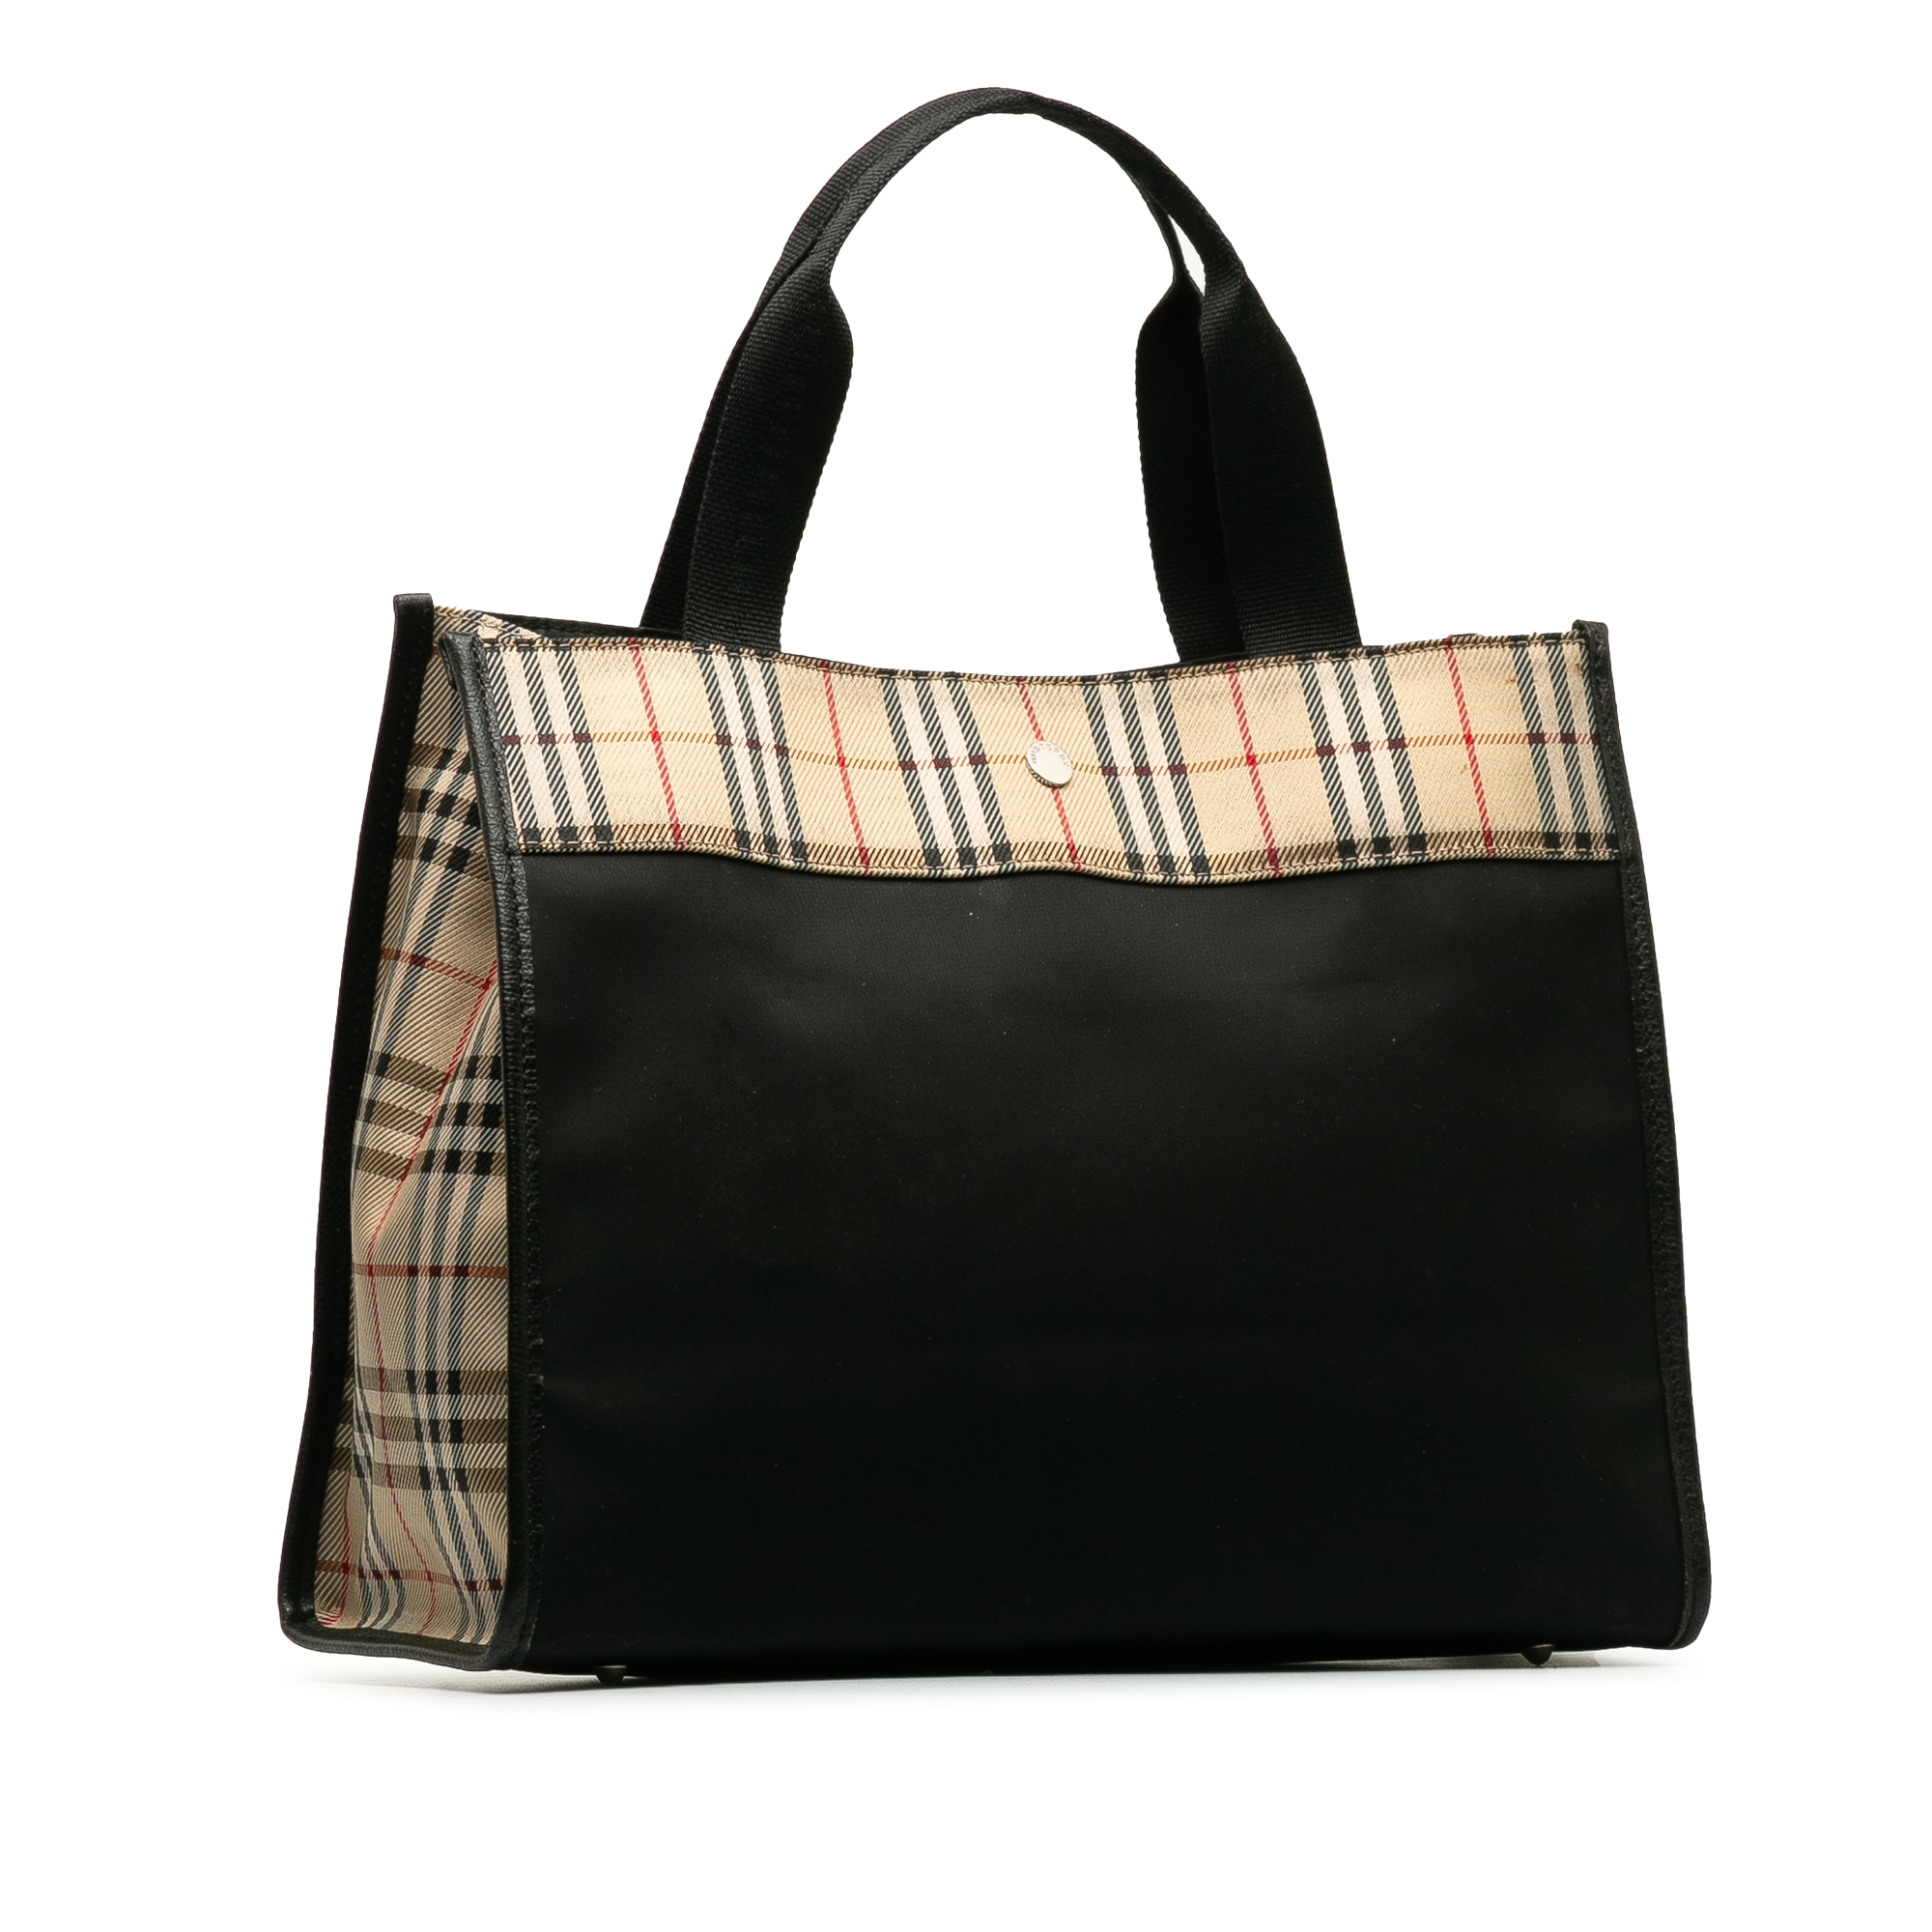 Burberry House Check Tote - Image 2 of 10